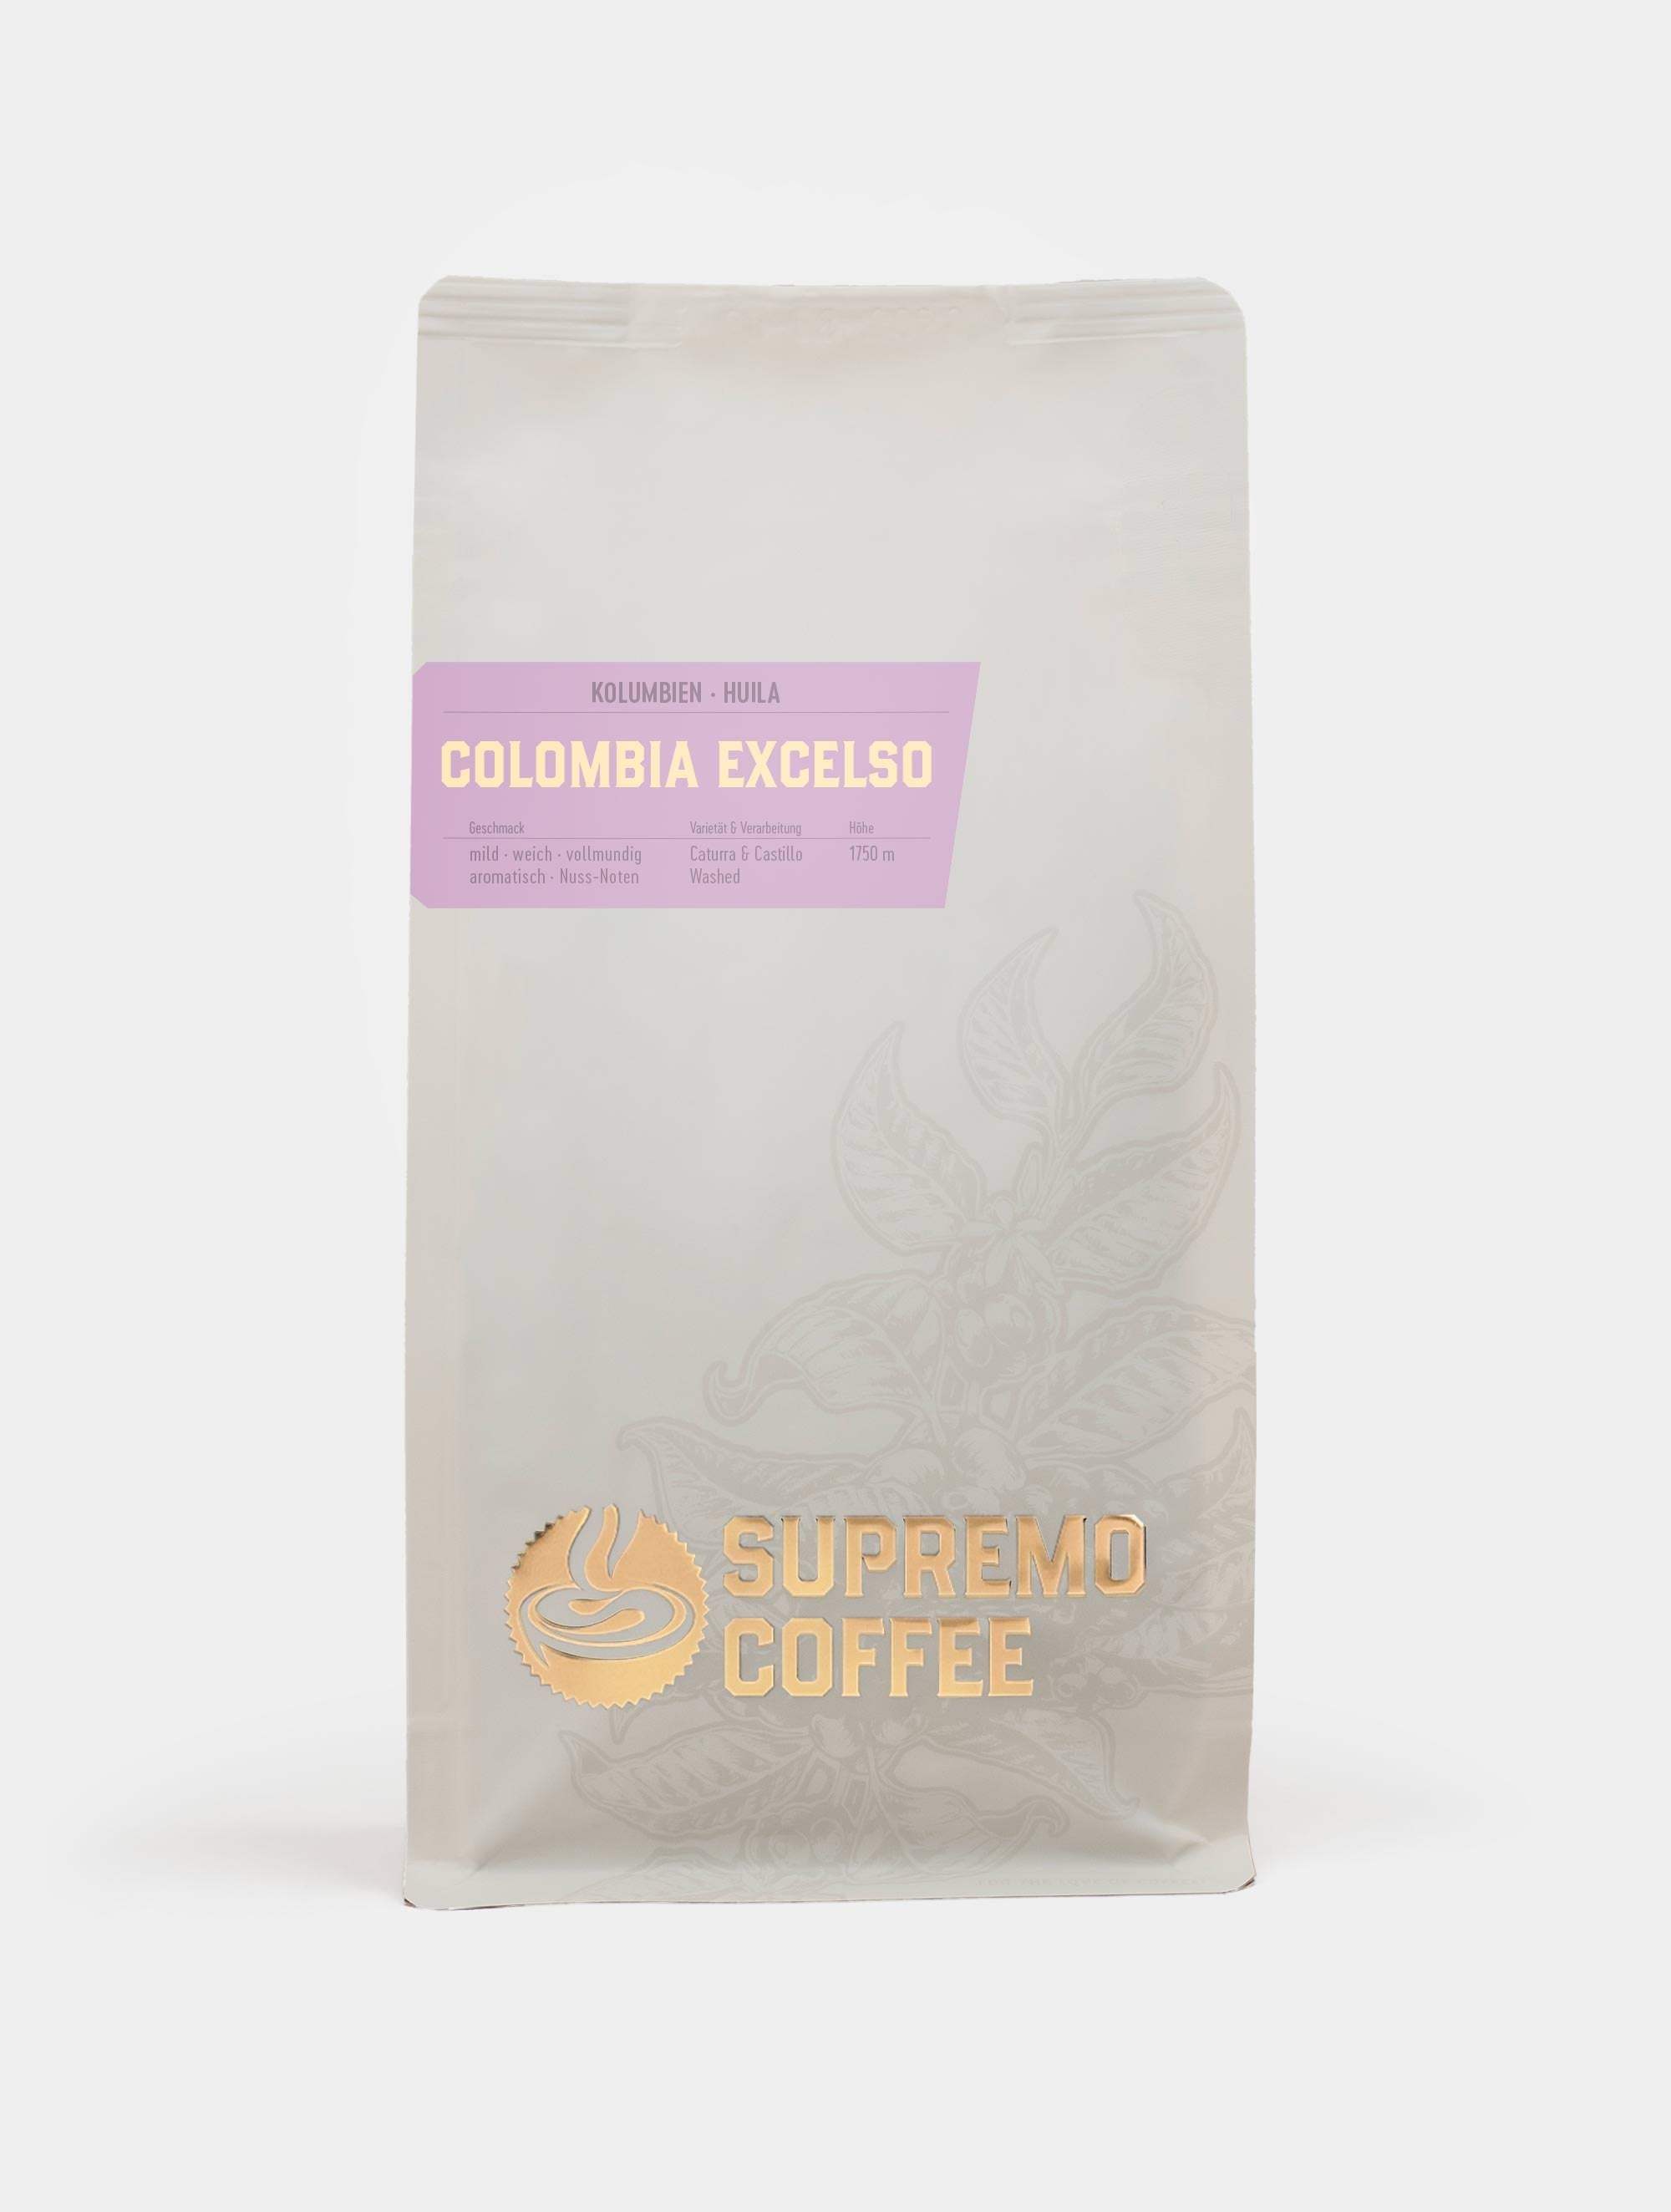 Colombia Excelso, Kolumbien | SUPREMO Coffee